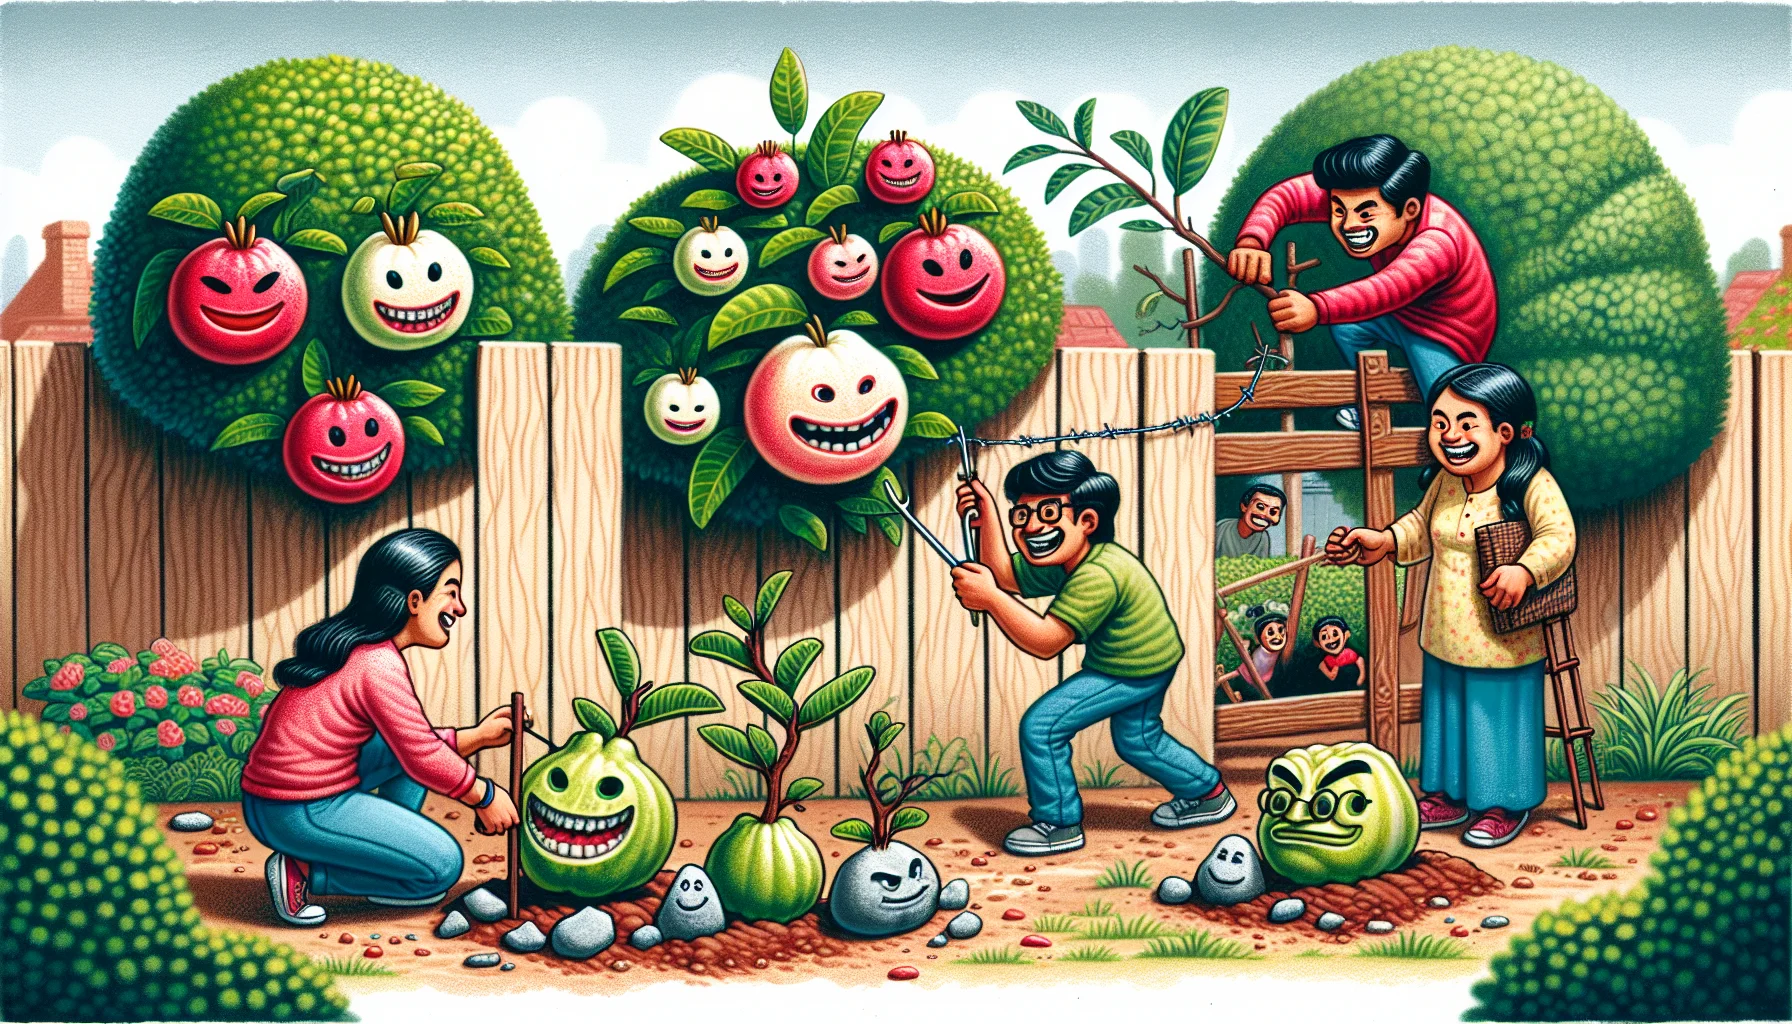 Depict a humorous garden scene that features multiple types of guavas, such as red, white, and pink-fleshed varieties. A South Asian male is engaging in a tug-of-war match with a small, stubborn shrub, while a Caucasian female creates quirky faces out of stones and places them beside the guava plants, inviting laughter. Meanwhile, a Hispanic child curiously explores a gap in a wooden fence, revealing a surprise guava tree. This amusing, light-hearted scene encourages and demonstrates the fun one can have while engaging in gardening.